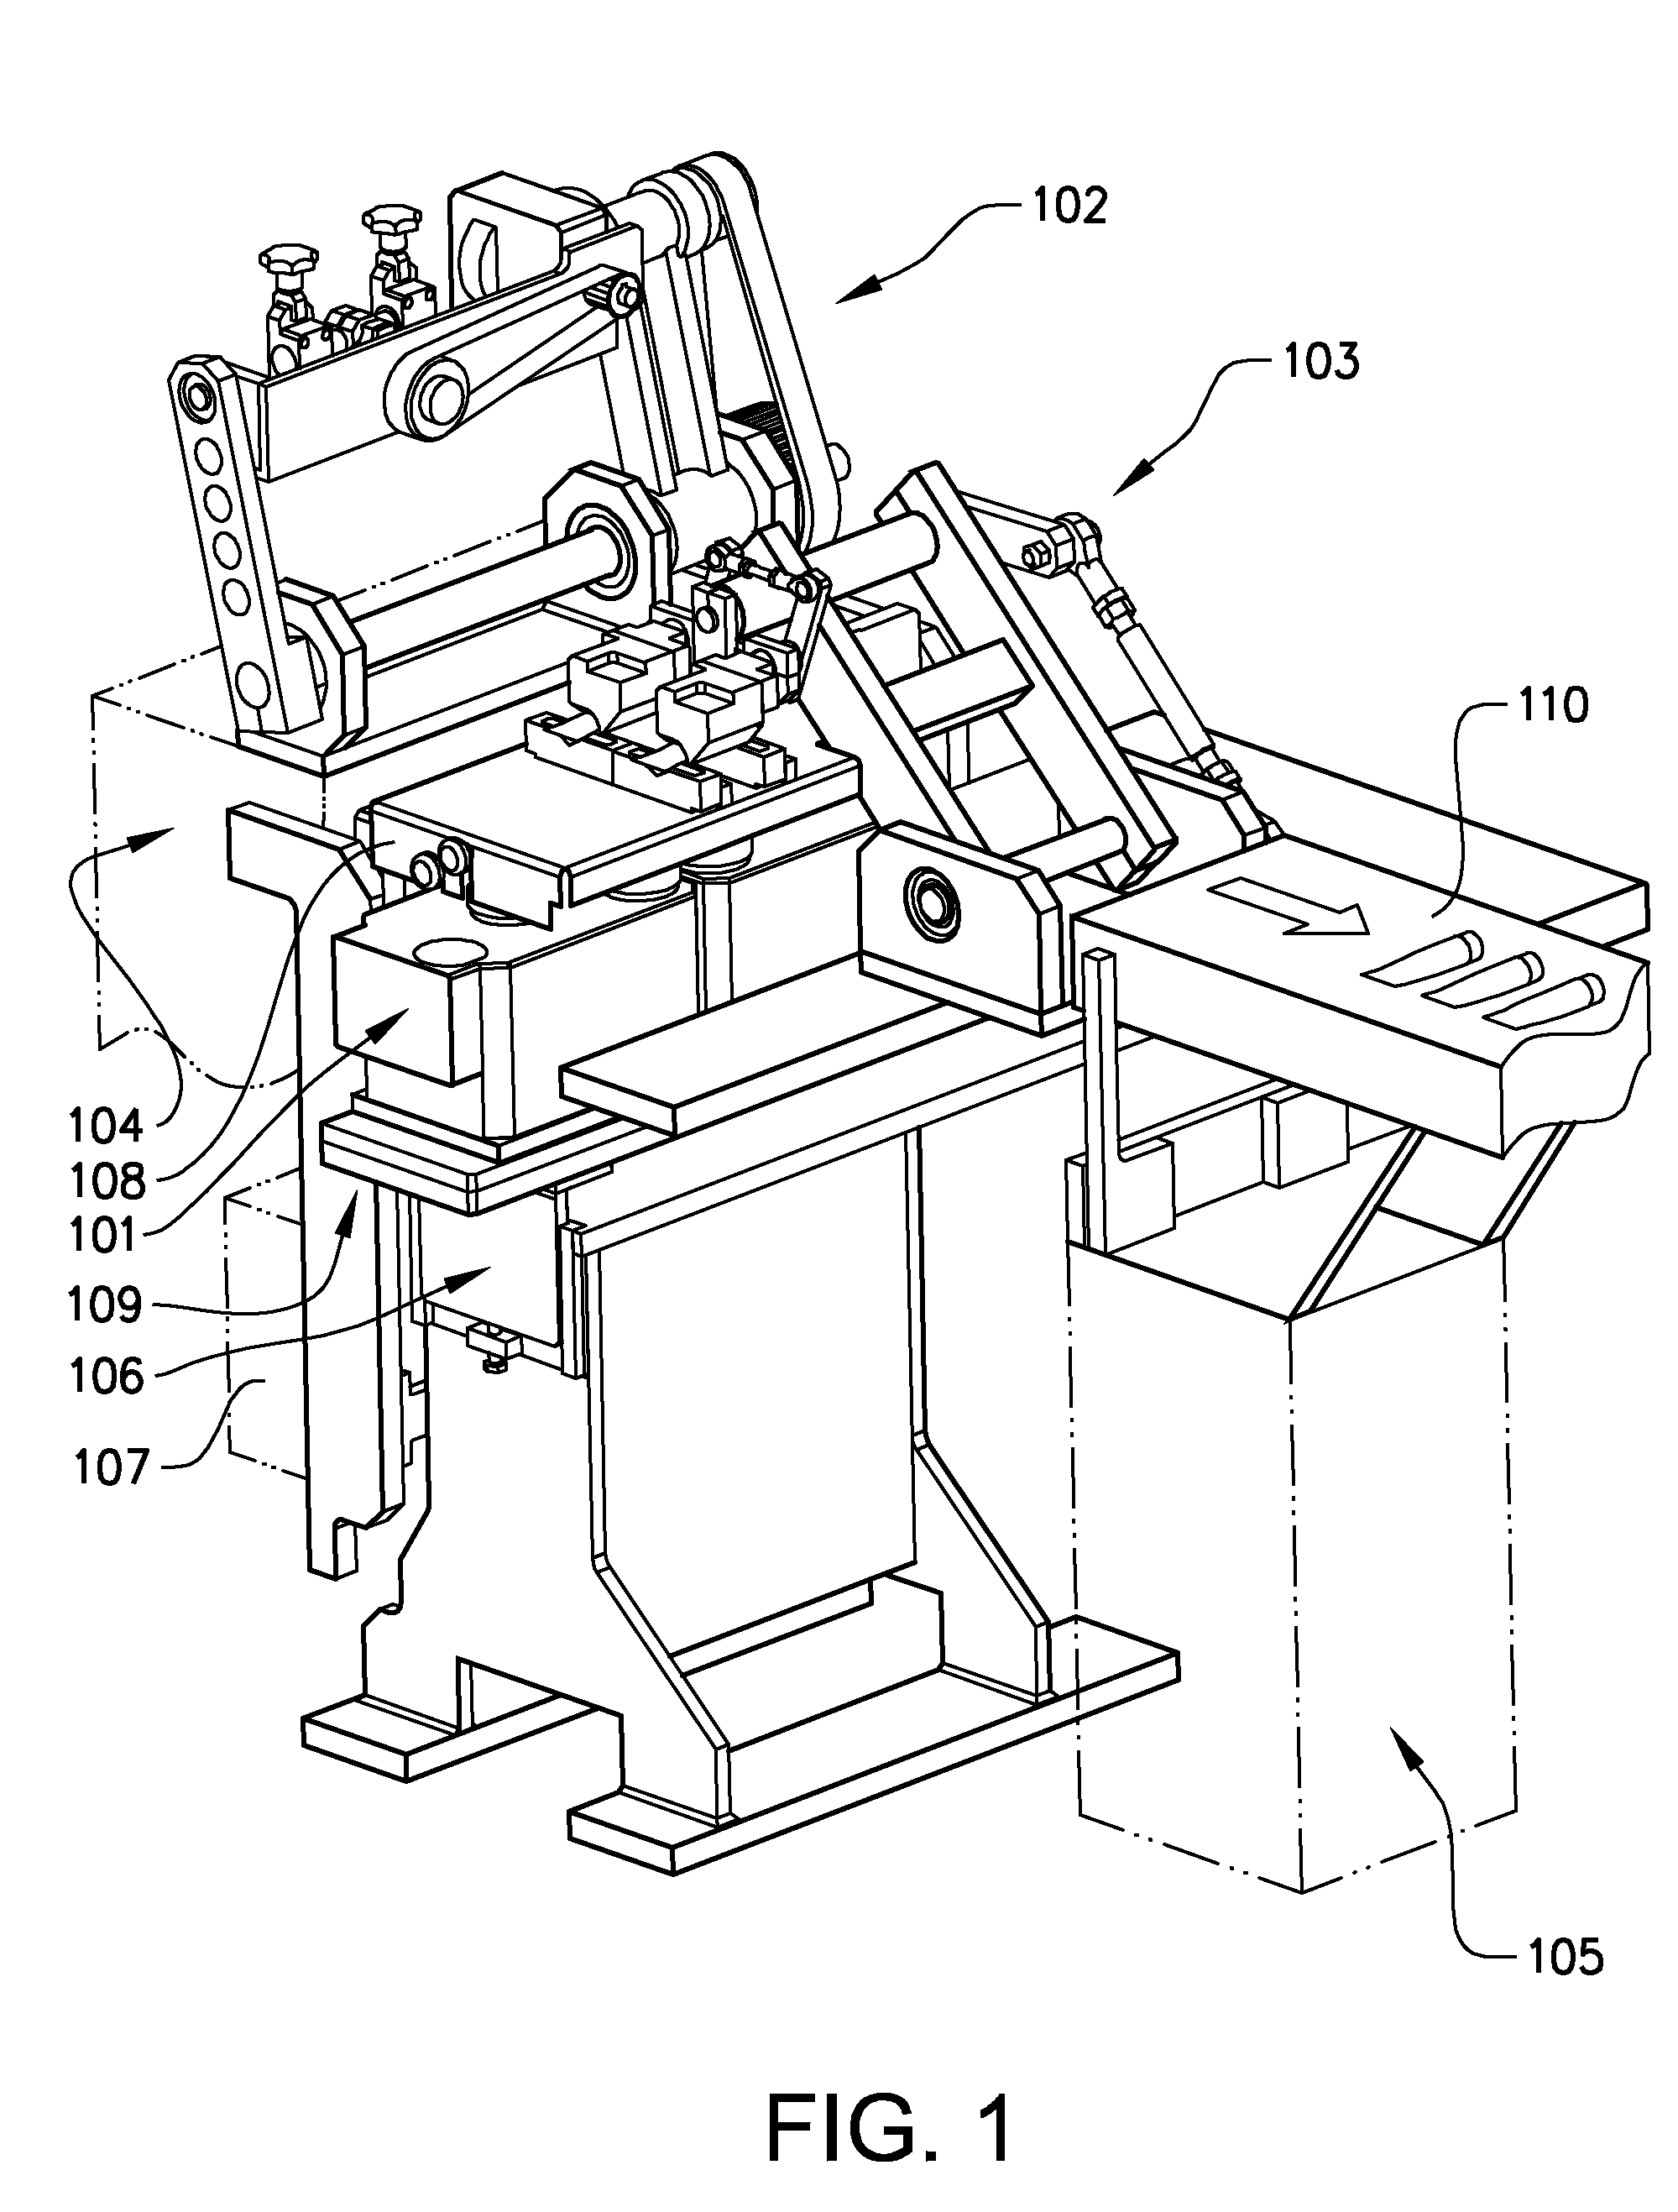 Method for weighing products and a checkweigher with roller assemblies that dampen the movement of the produce prior to weighing